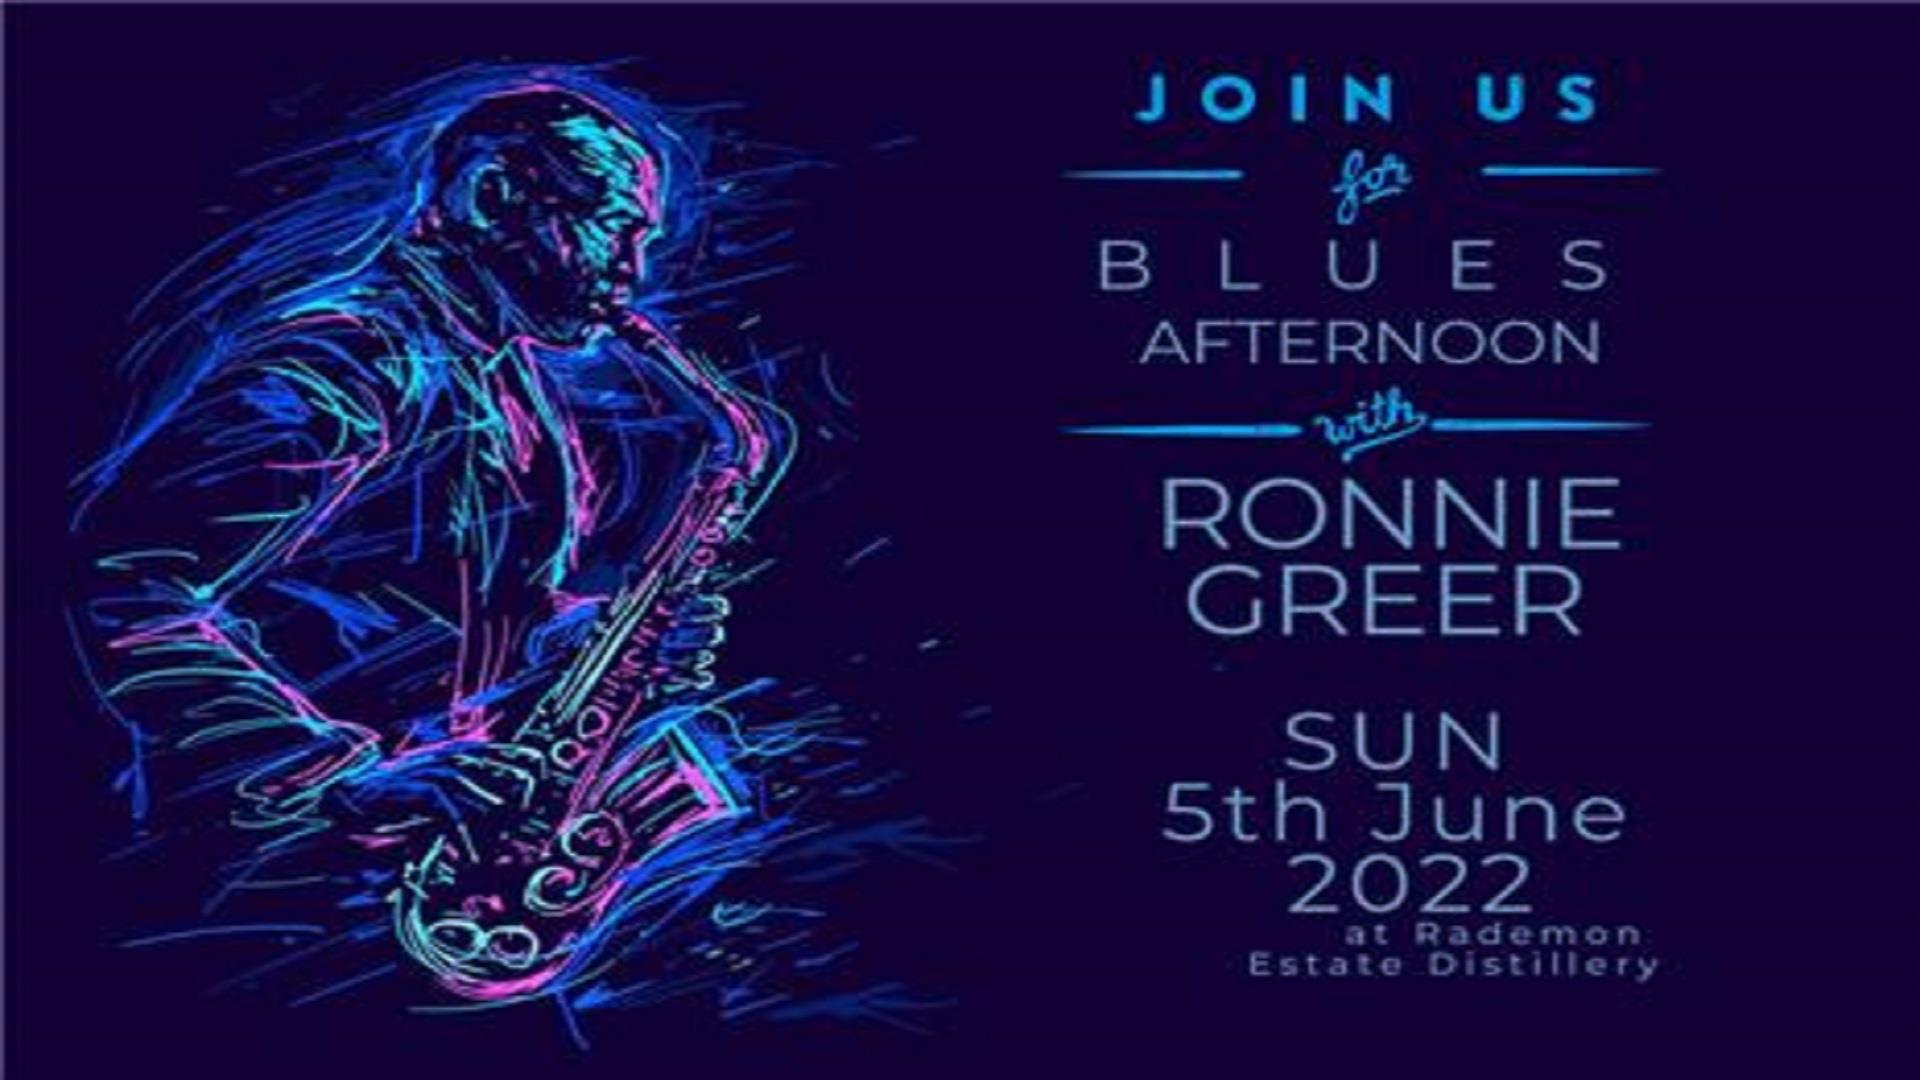 Poster with jazz player advertising Jazz event at Shortcross Gin on Sunday 5 June